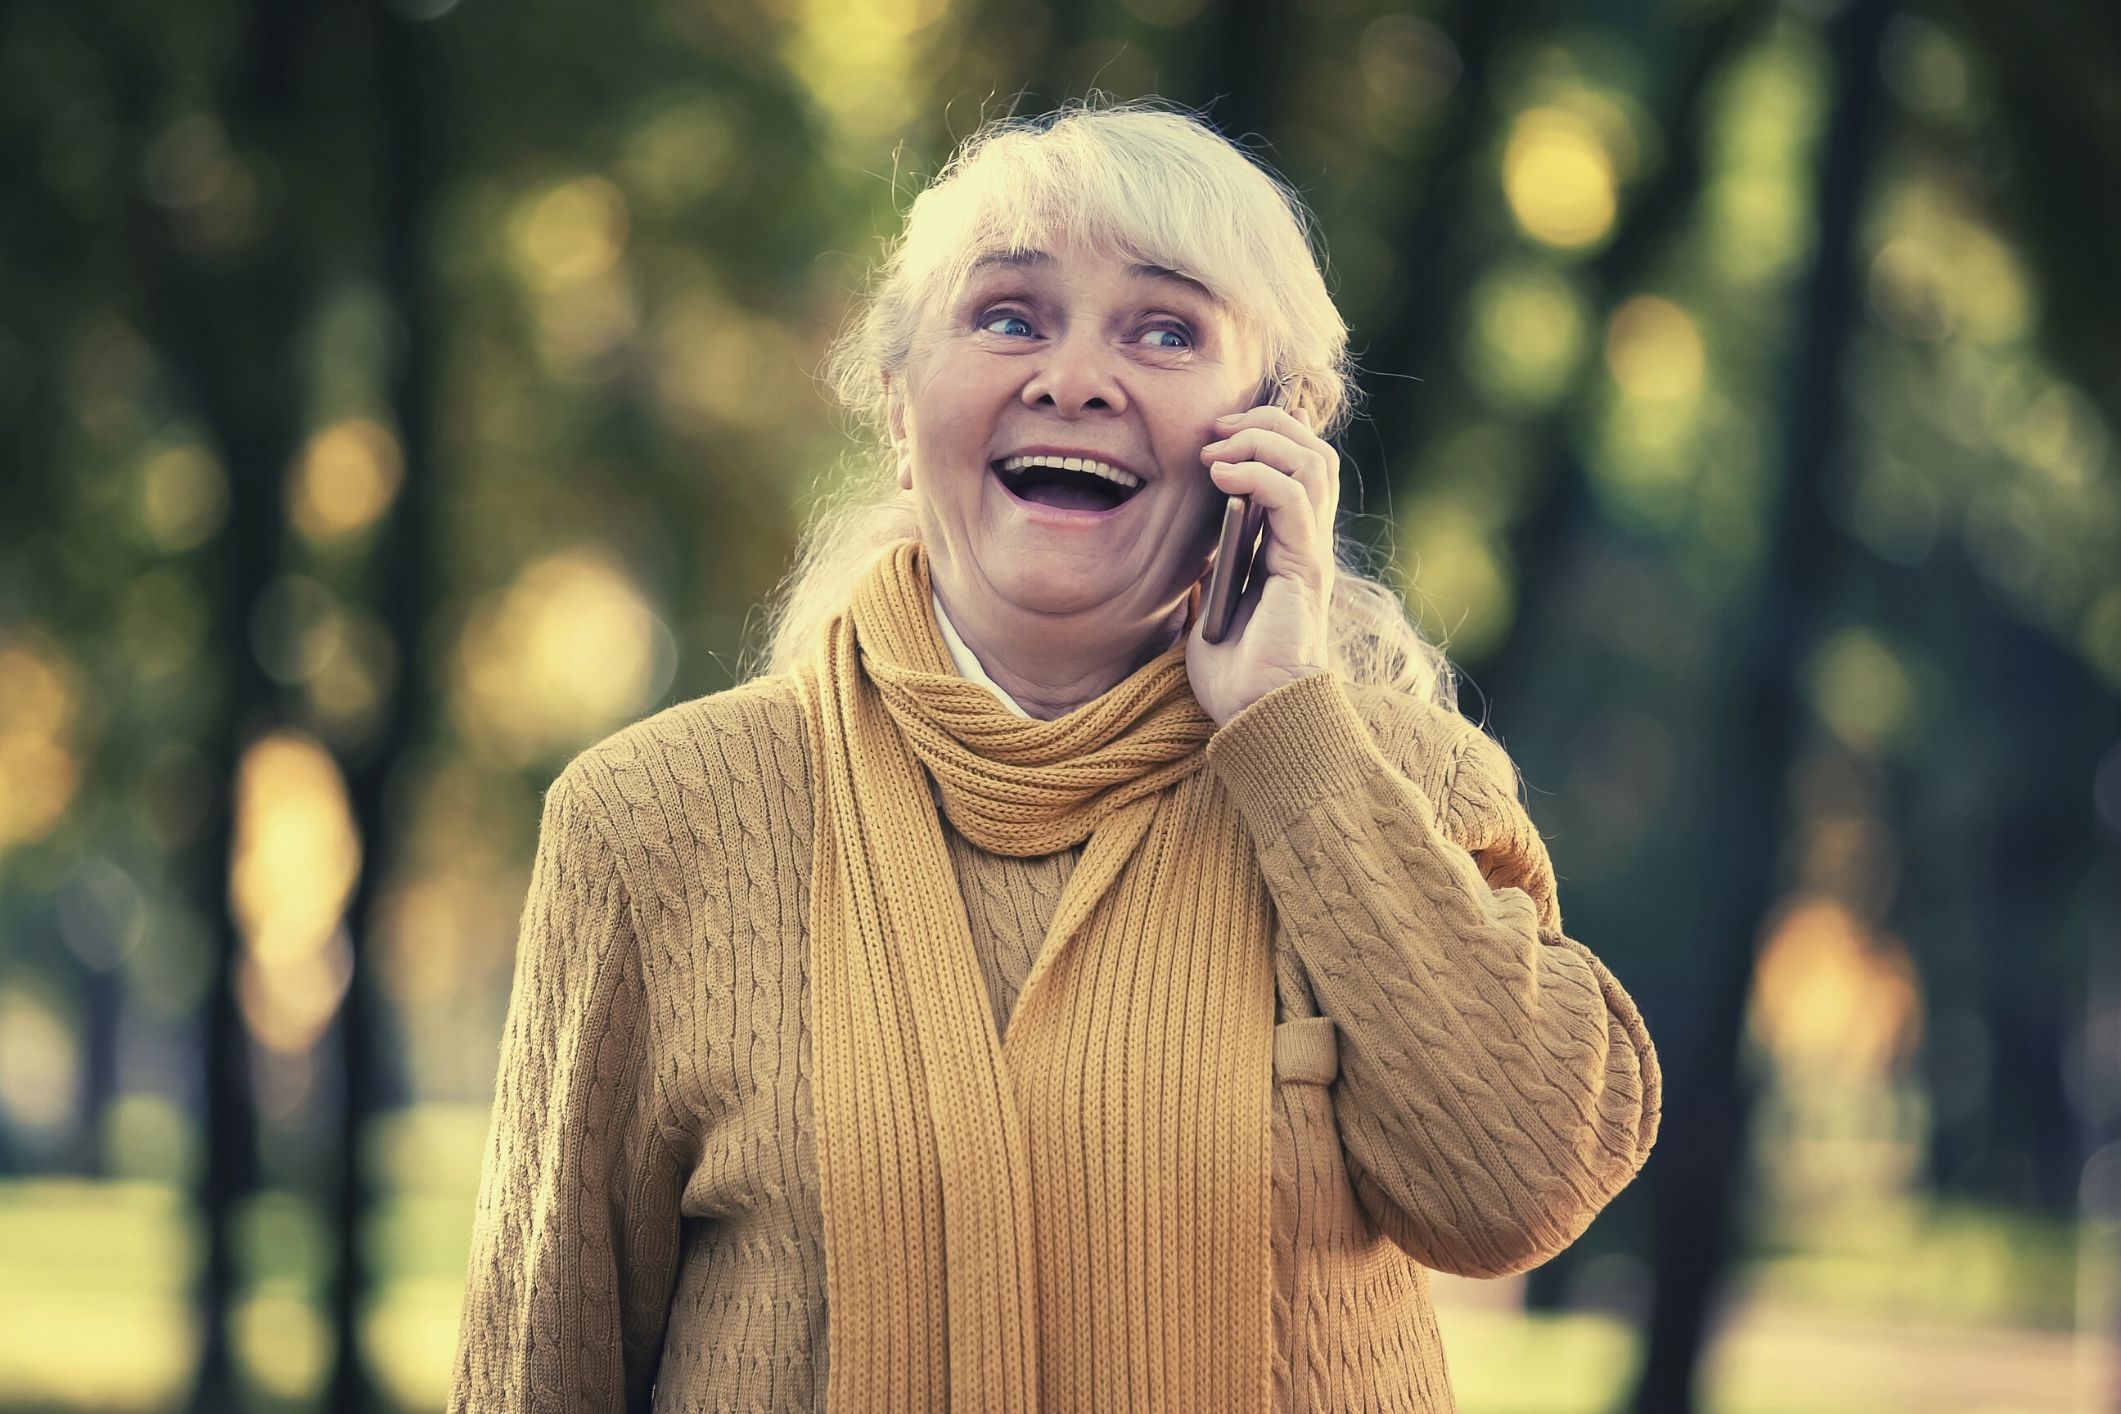 Grandmother outsmarts phone scammers and sets trap for their arrest